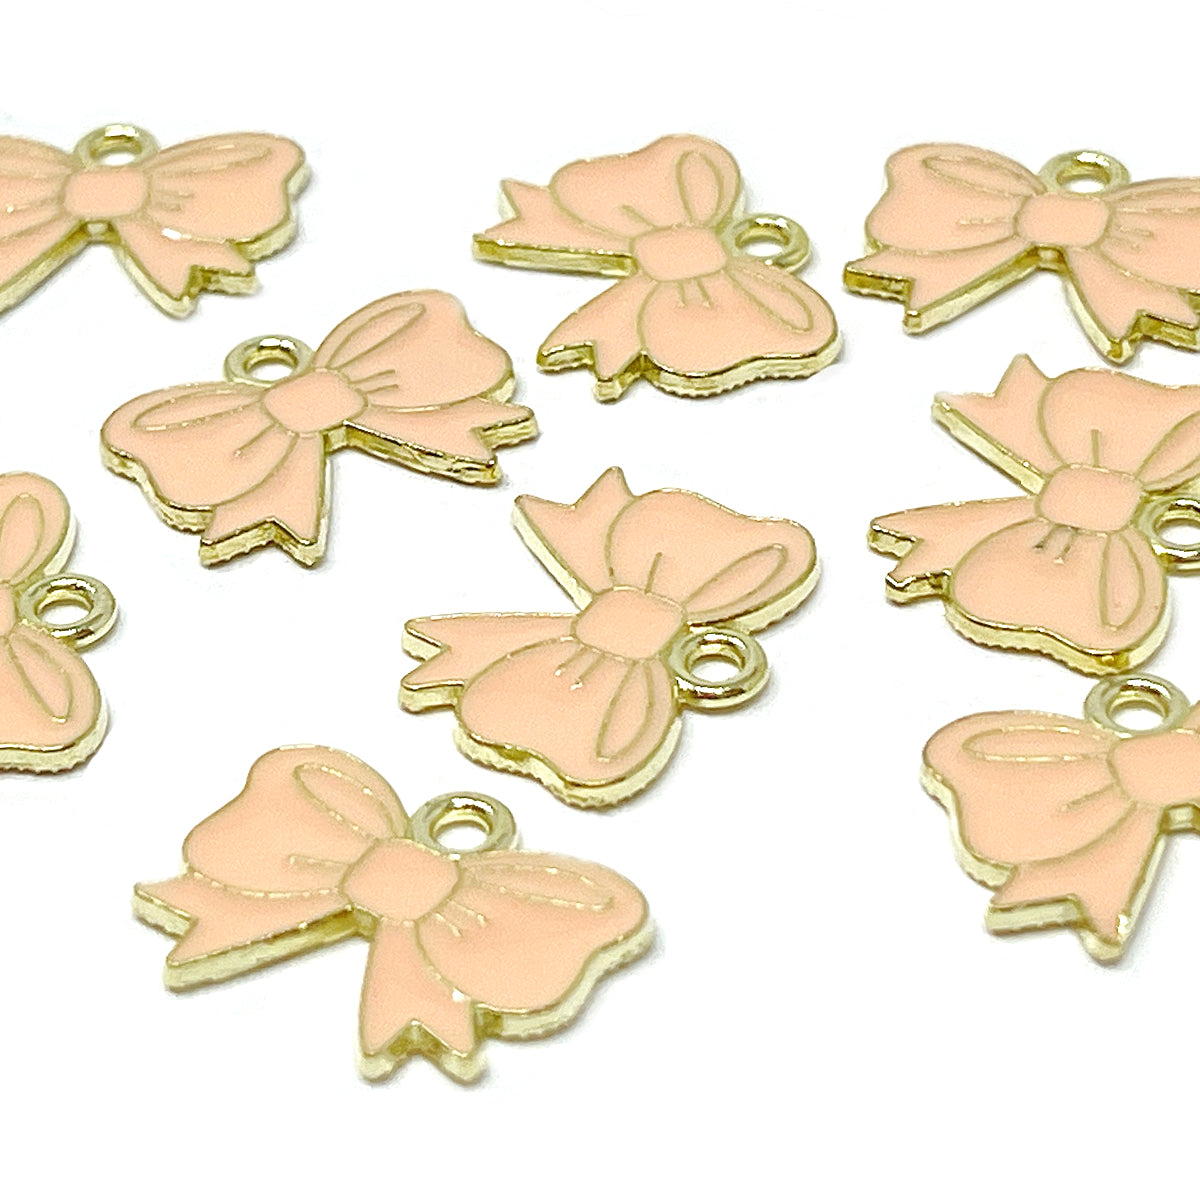 Wrapables Jewelry Charms for Jewelry Making Enamel Pendants (Set of 10) Carrots